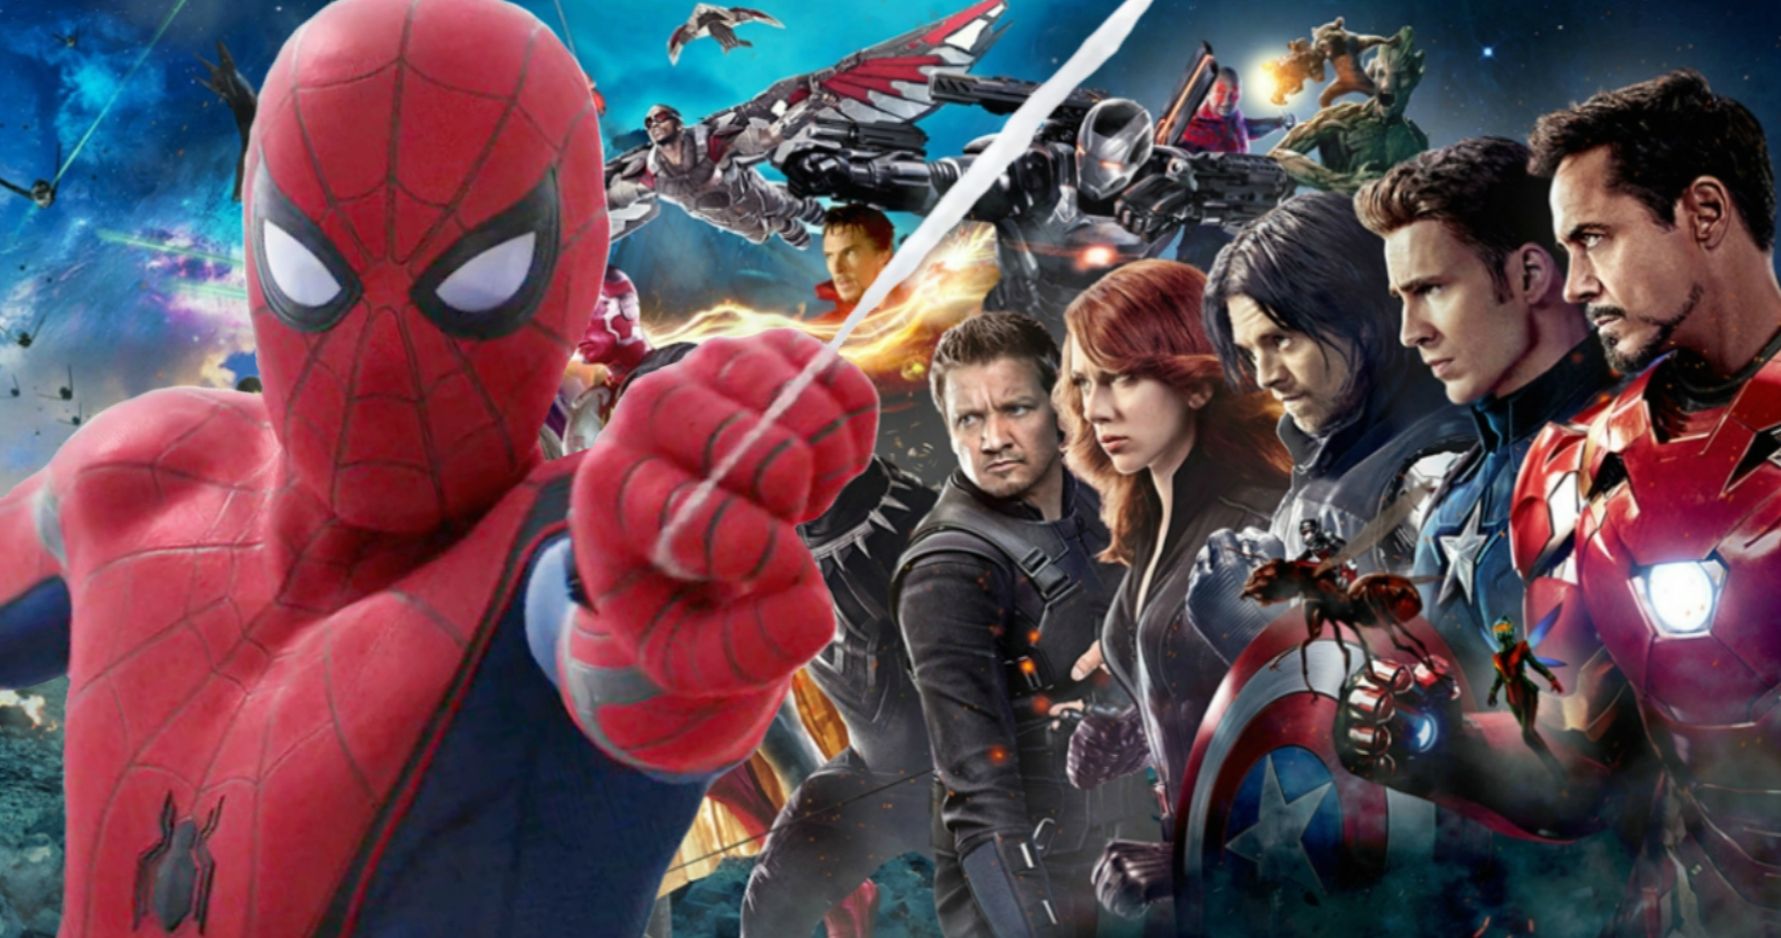 Over 3K Marvel Fans Are Ready to Storm Sony and Bring Spider-Man Home